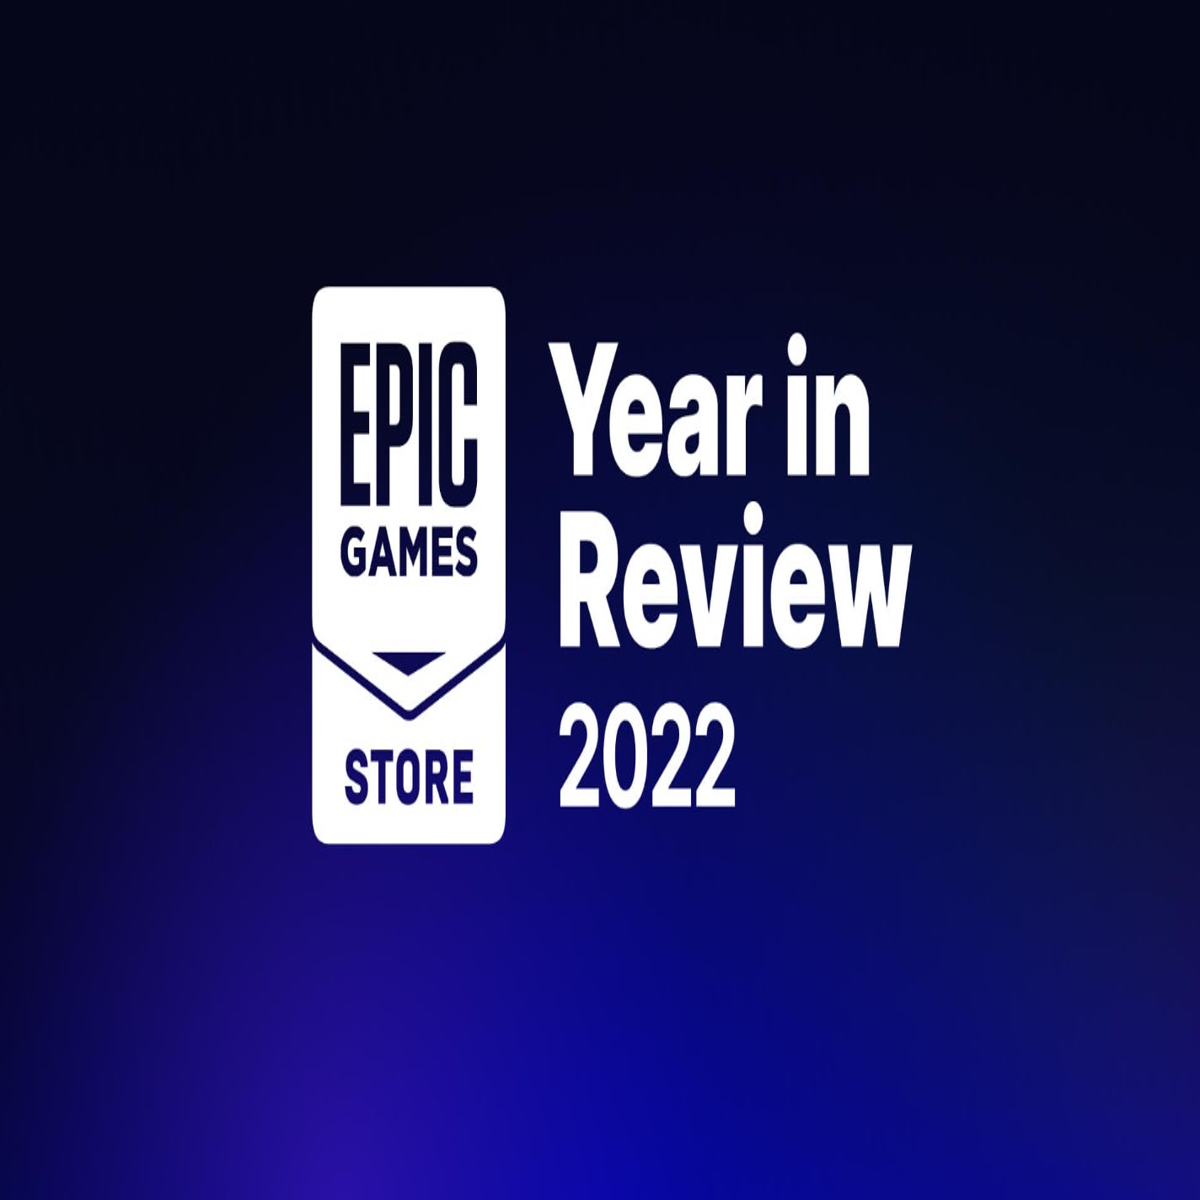 Epic says its PC game store now has more than 100 million users